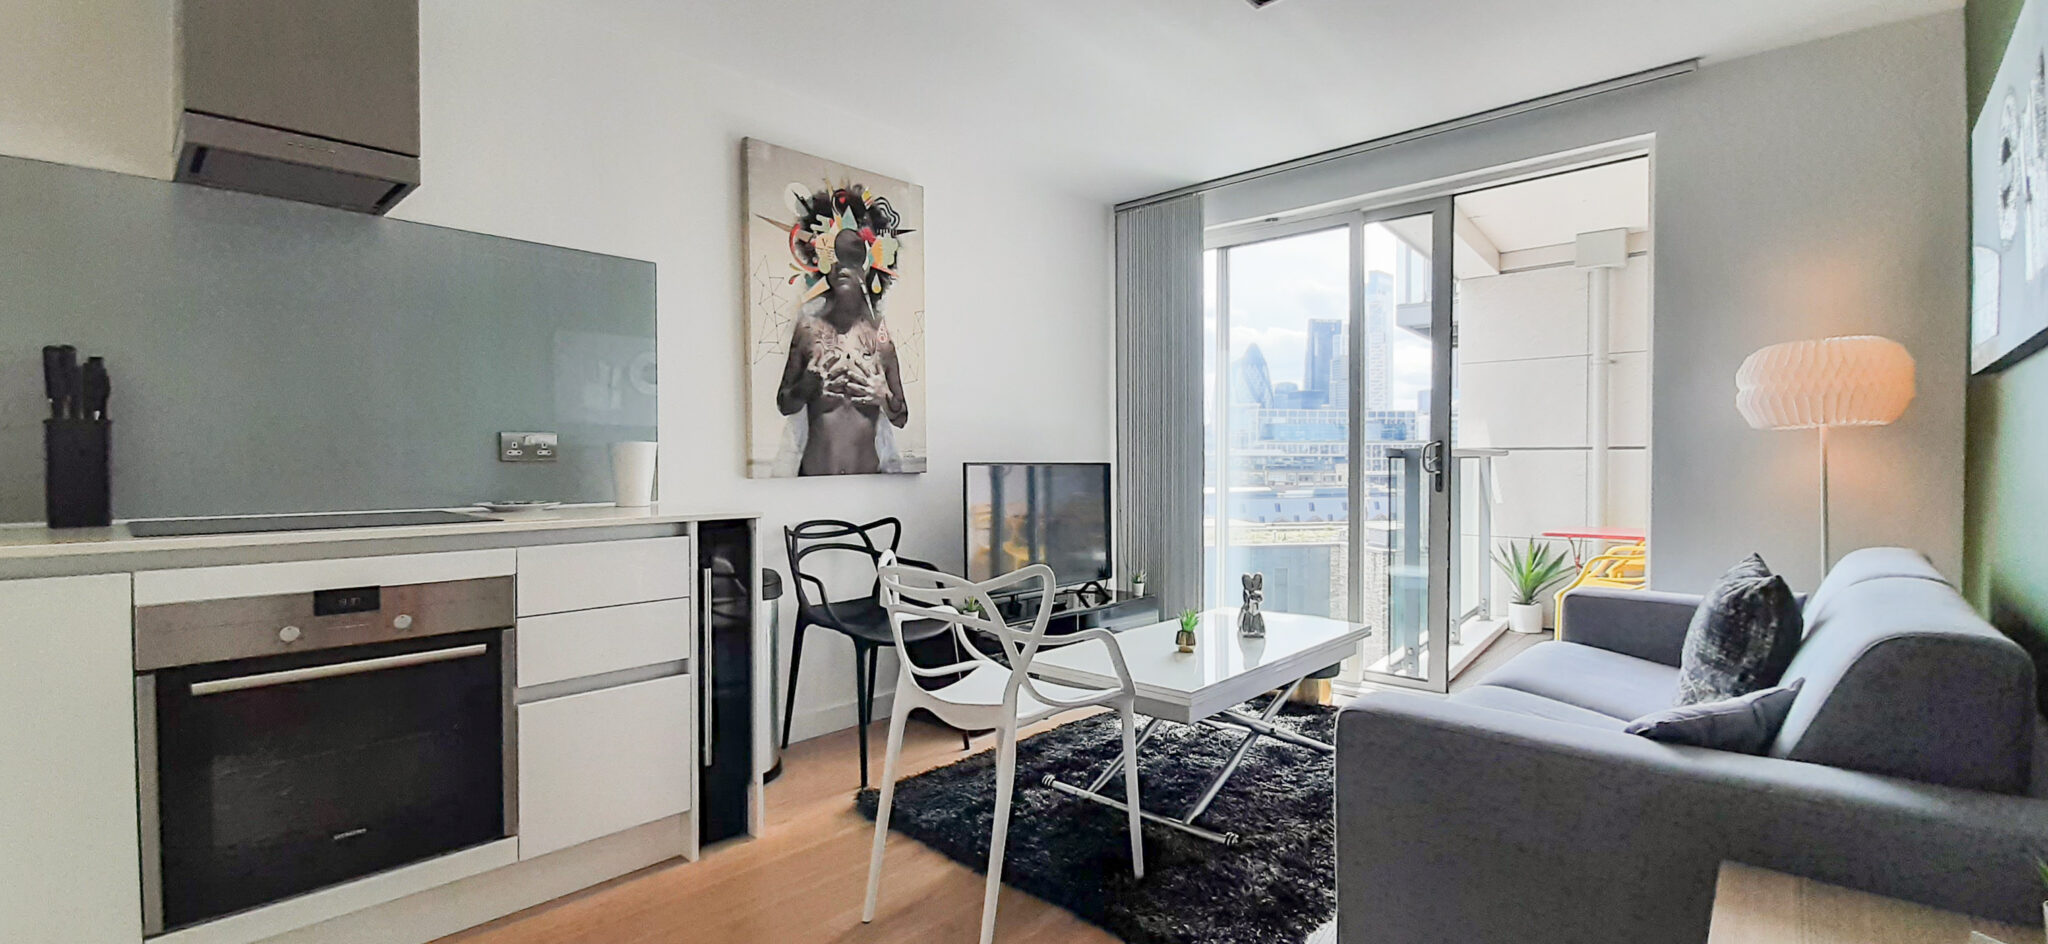 Experience-urban-living-in-London's-coolest-neighbourhood-by-booking-Avantgarde-Place-Serviced-Apartments-in-Shoreditch.-Book-your-stay-today-|-Urban-Stay